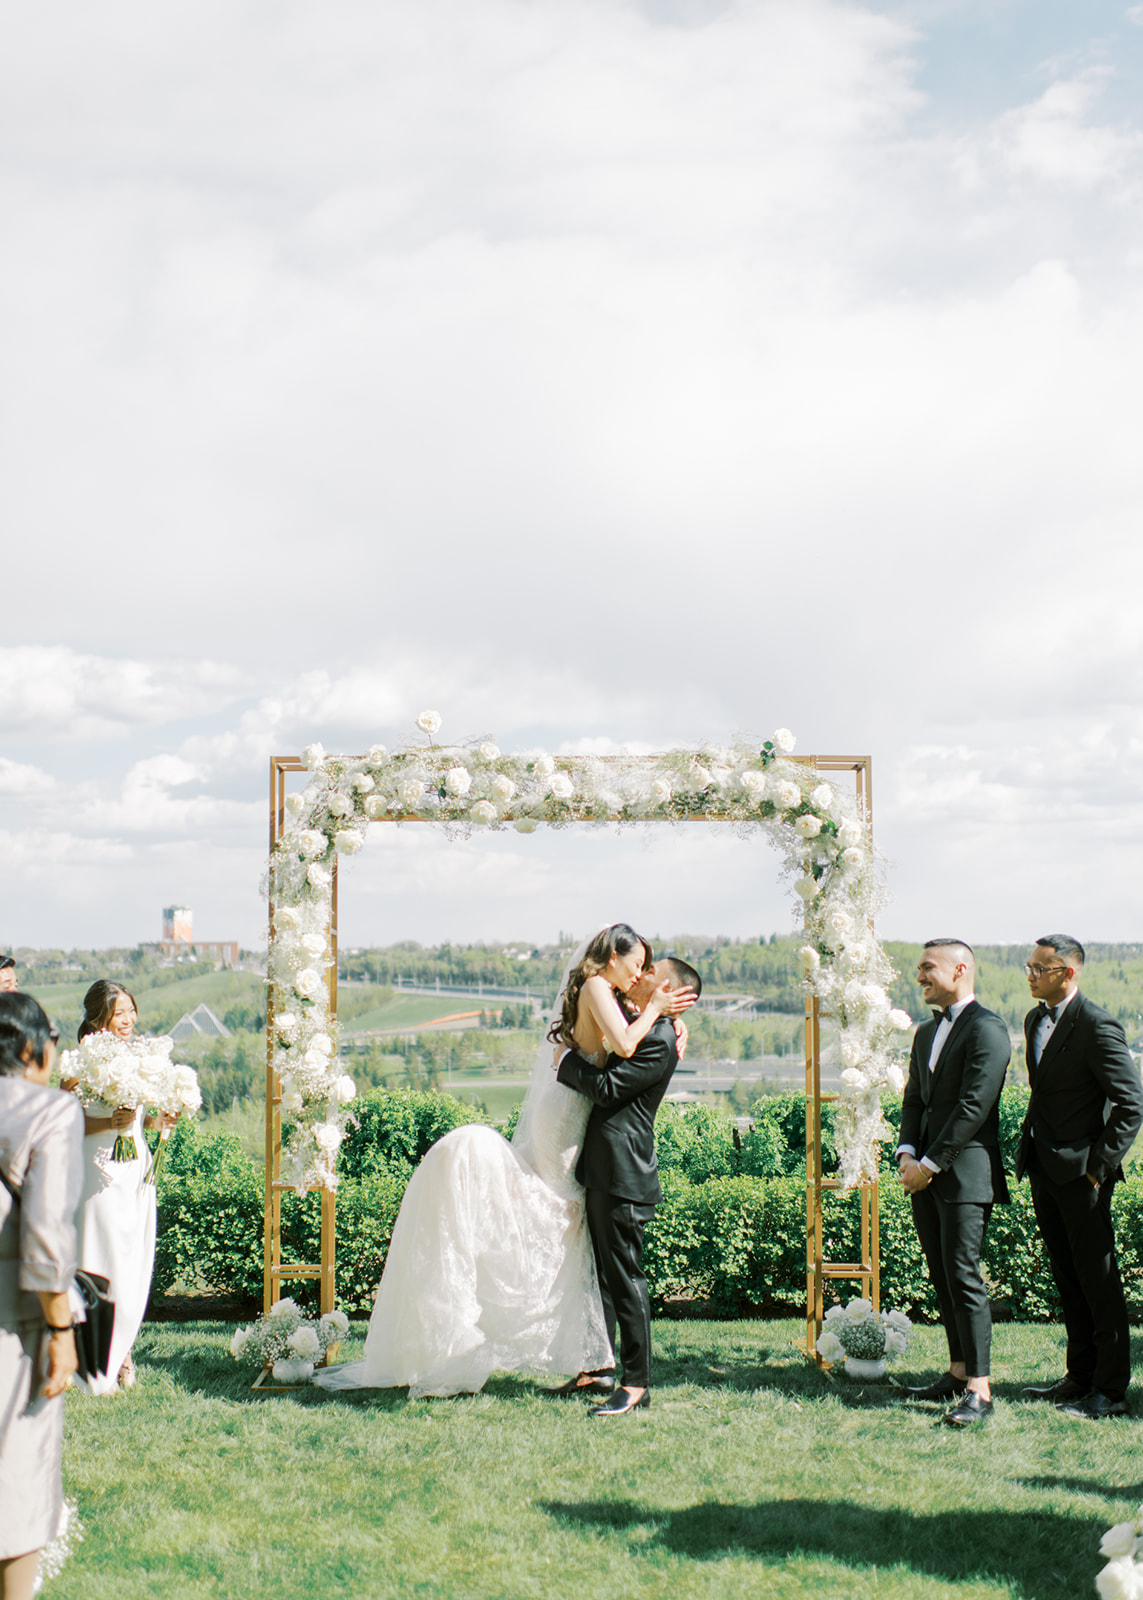 First kiss for bride and groom at outdoor wedding reception, gold and white wedding archway, black and white modern wedding